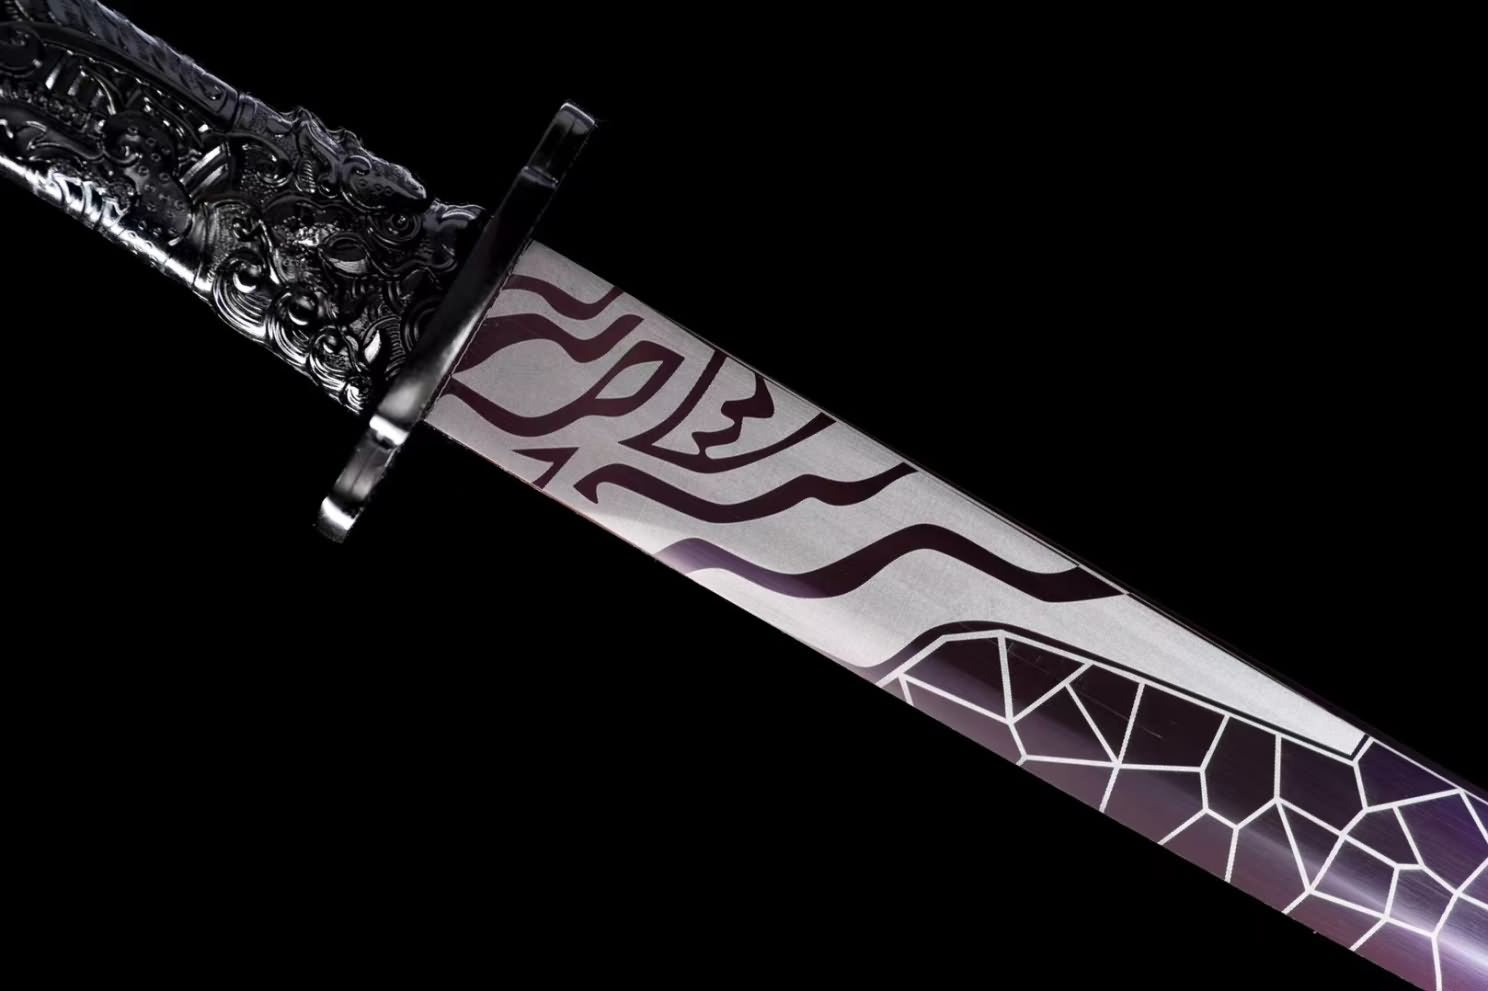 Embroidery Spring Sword-Handcrafted High carbon Steel Blade with Laser Engraved Patterns,Rosewood Scabbard,Alloy Fittings